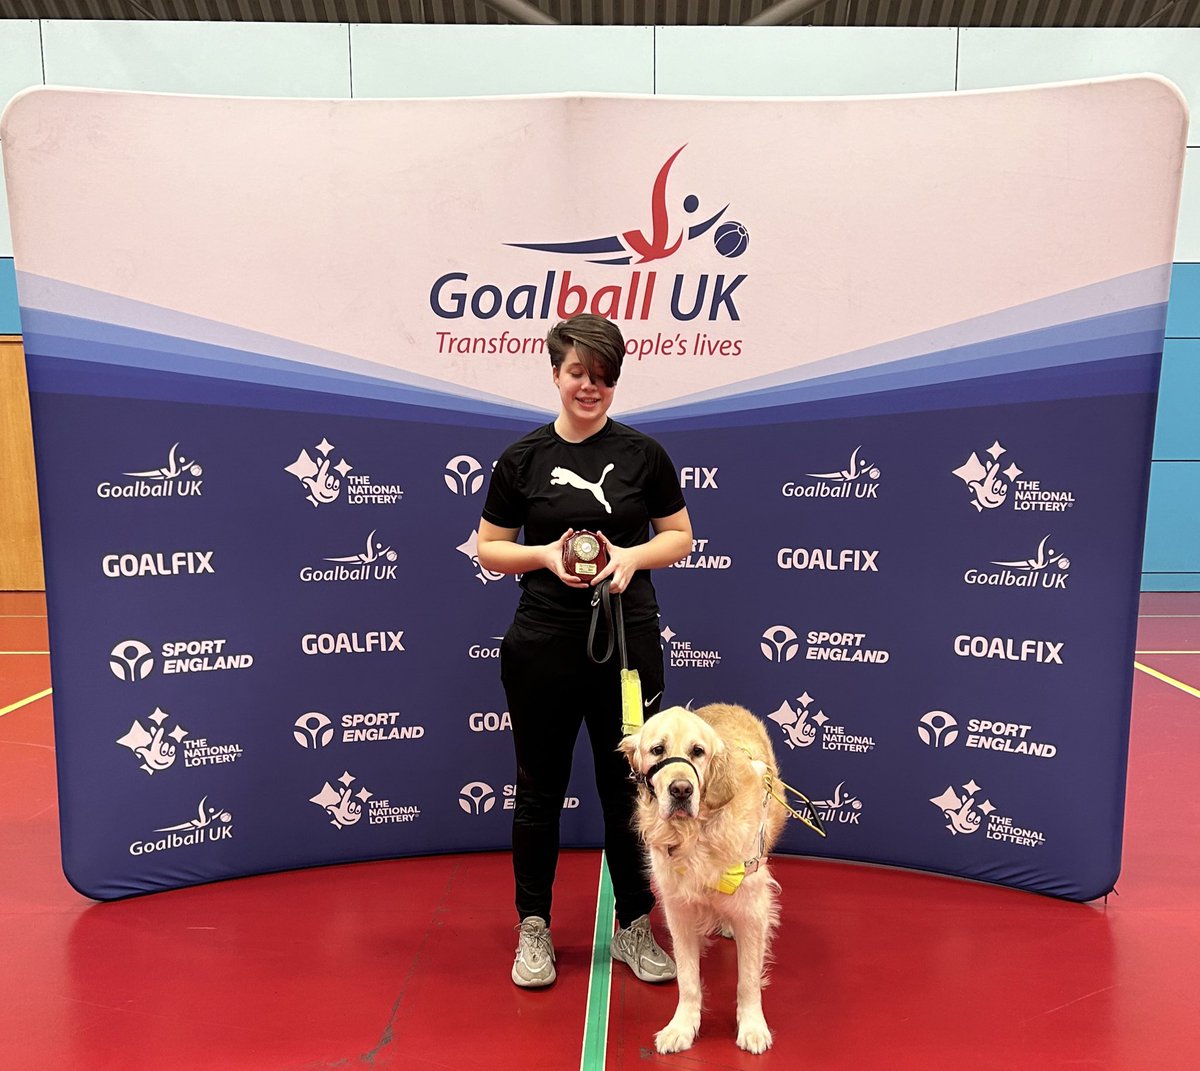 Freya and guide dog Lennon stand in front of the Goalball UK banner with her award